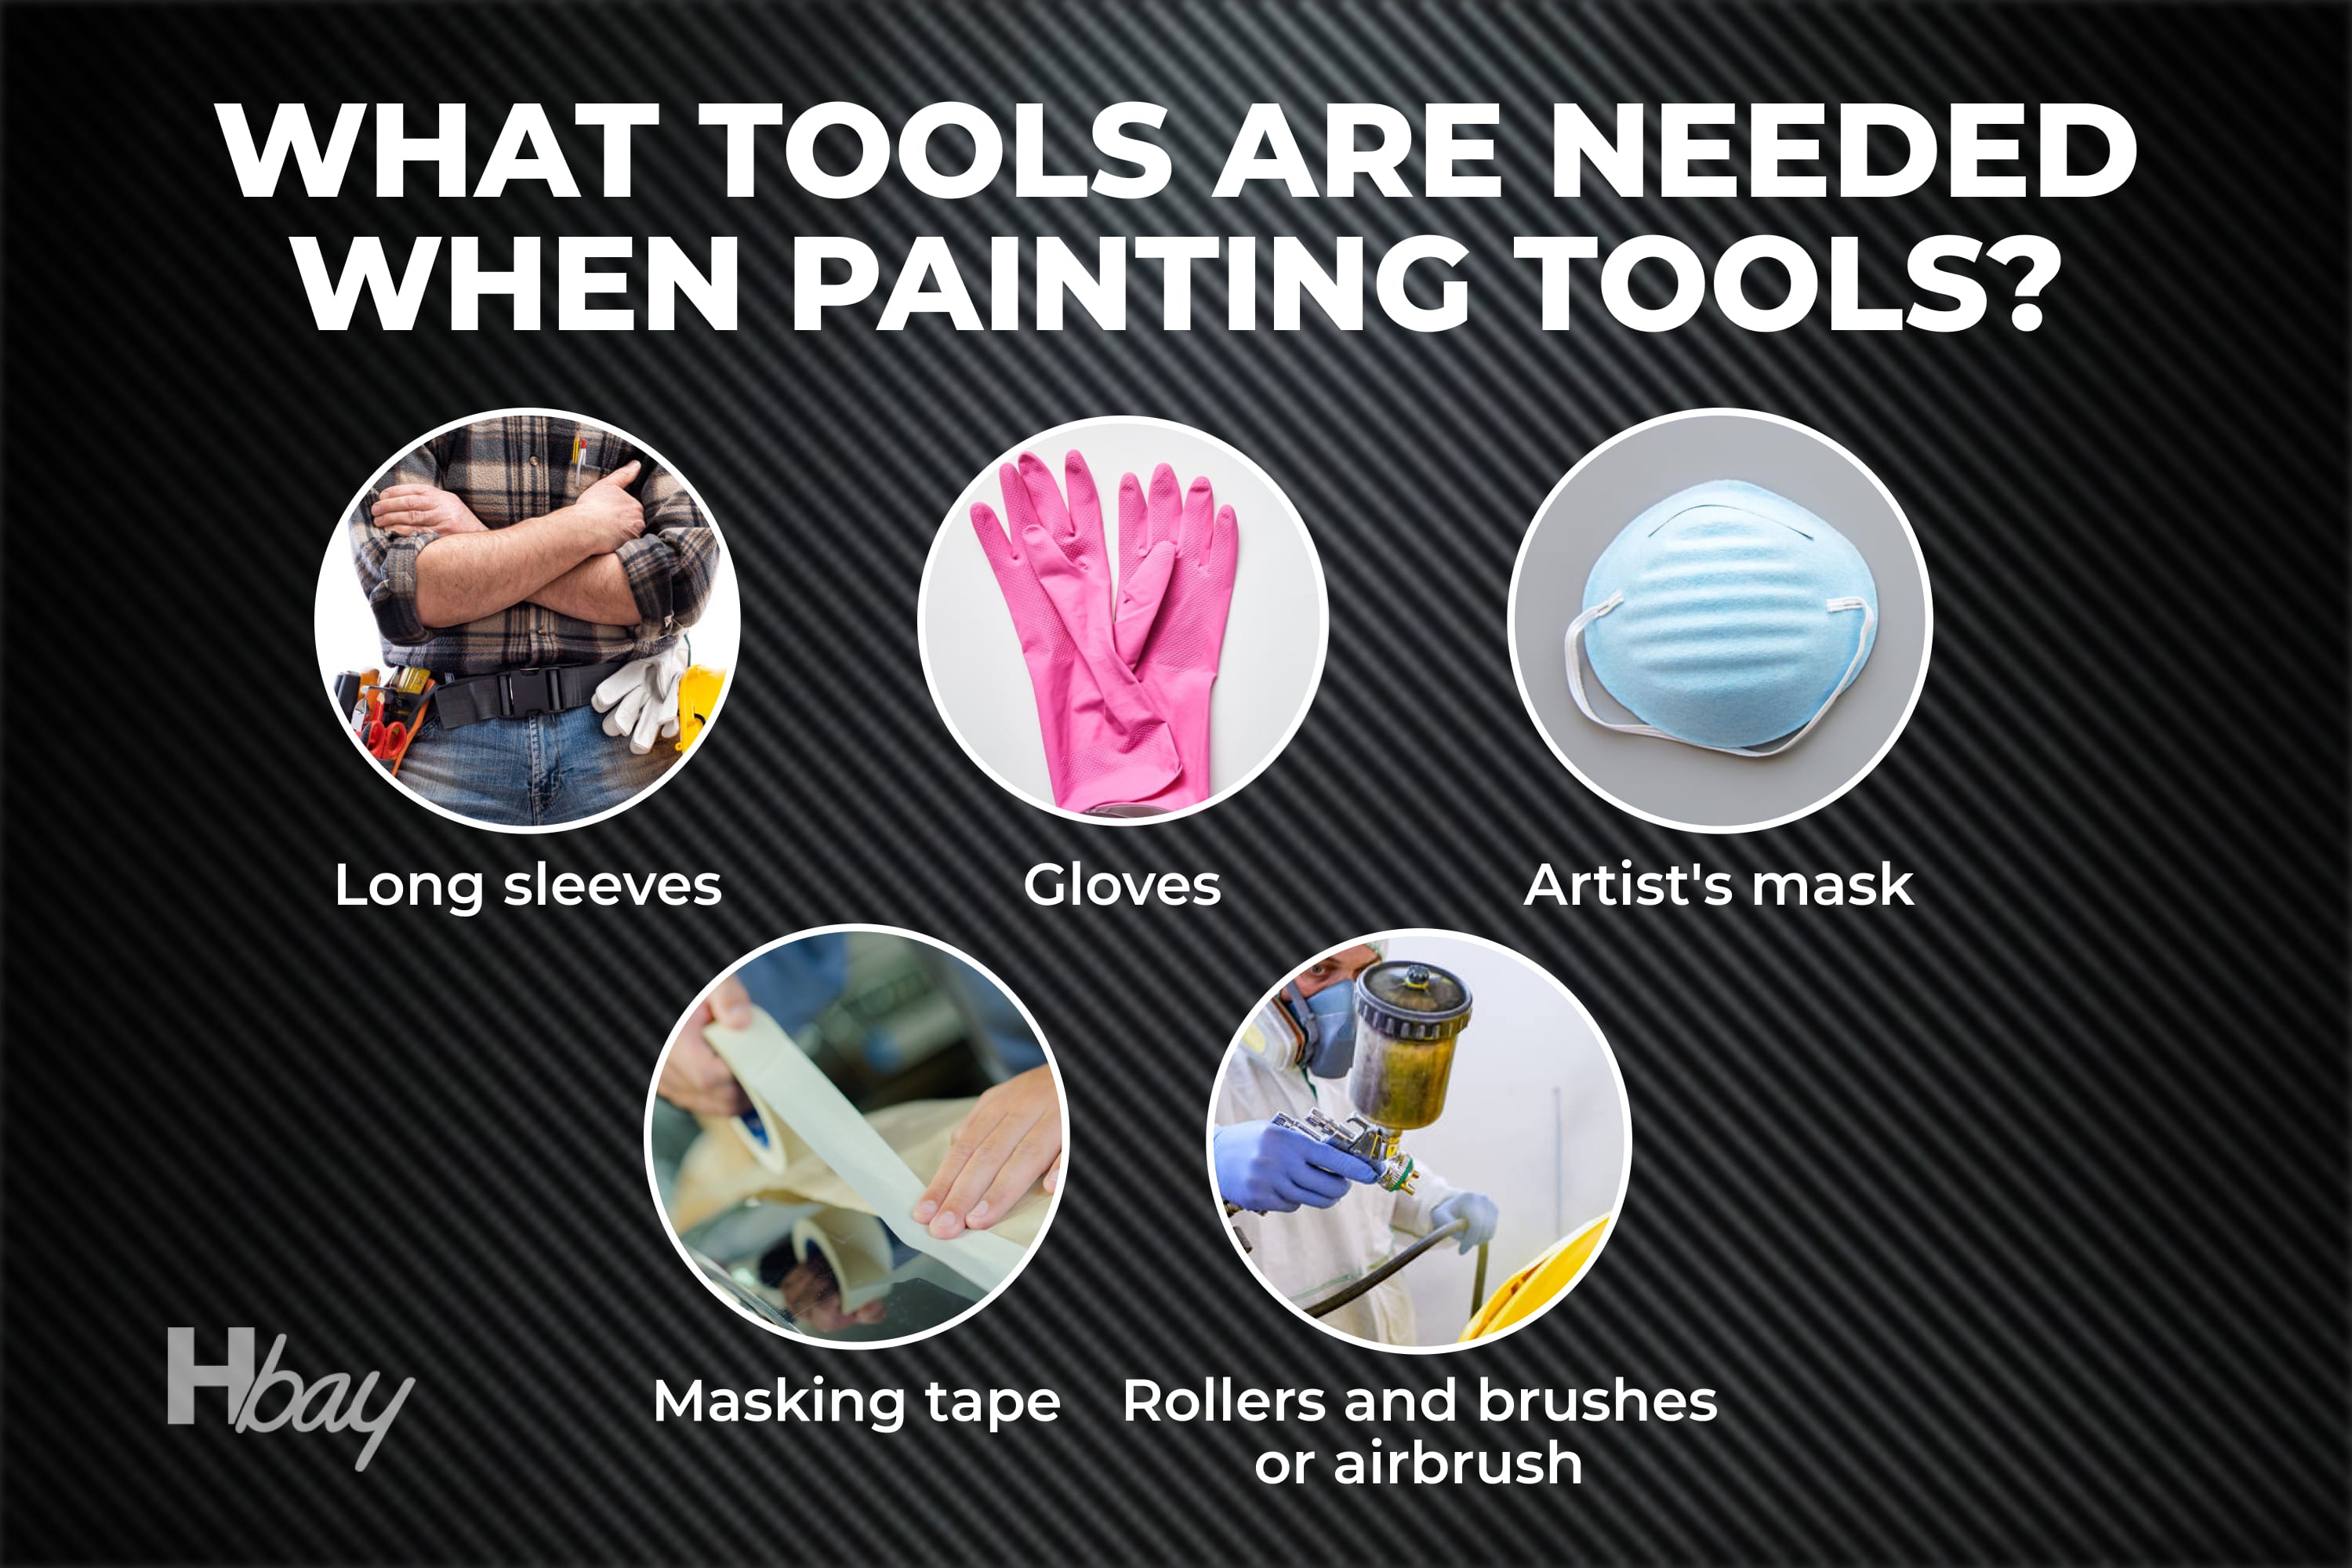 What tools are needed when painting tools